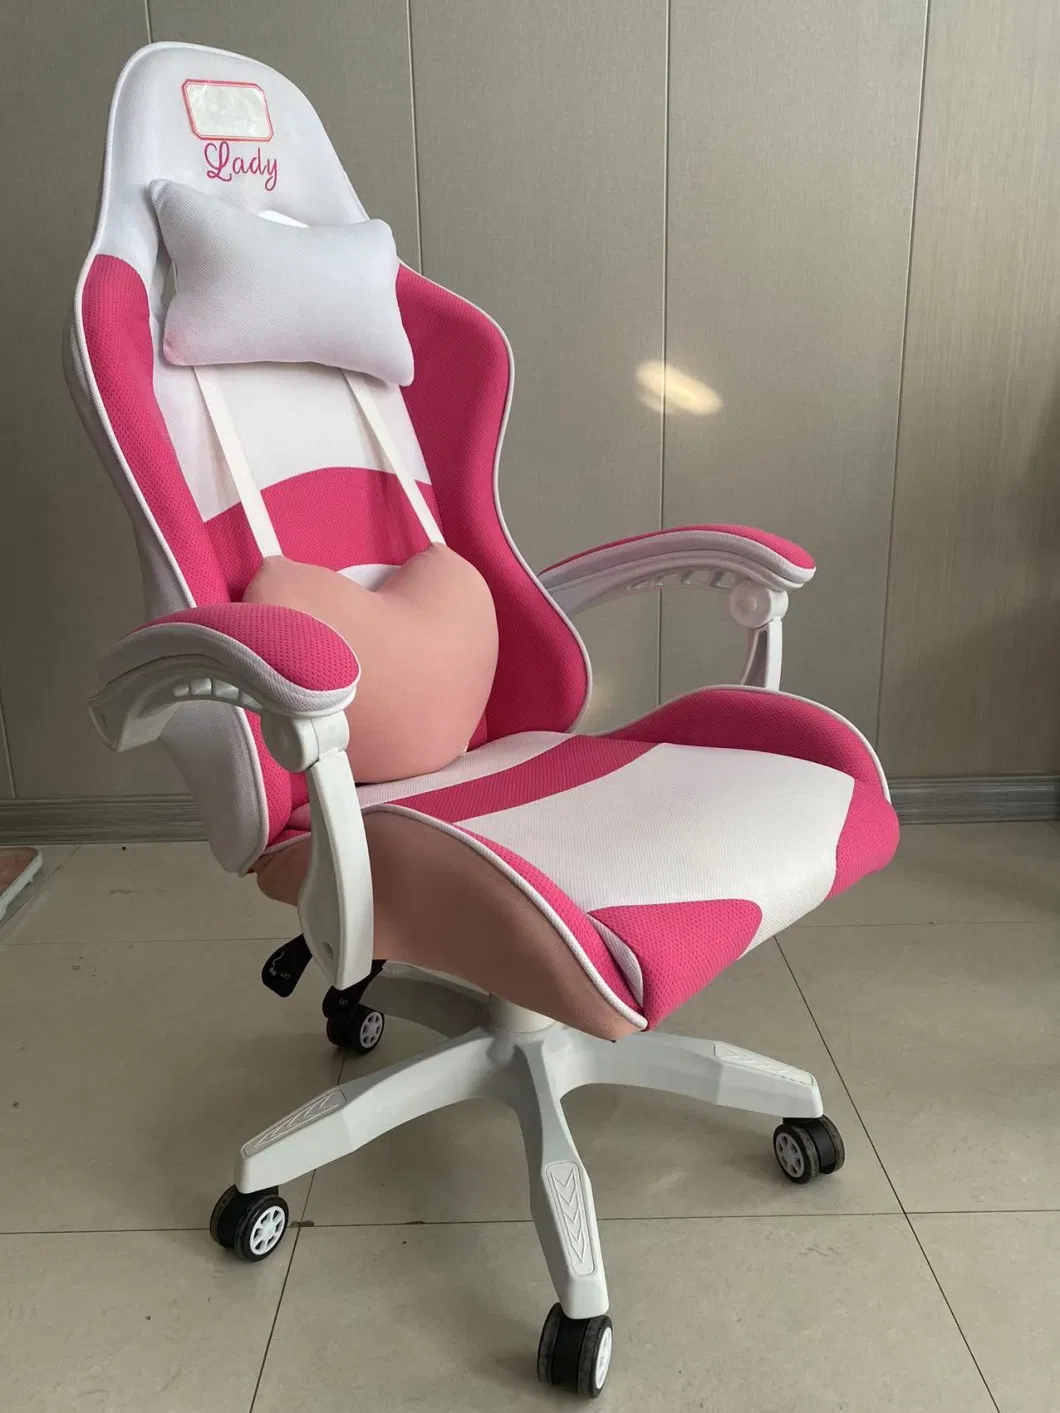 Rainbow Hexagon Gaming Chair Fabric Pink White Color Racing Computer Chair